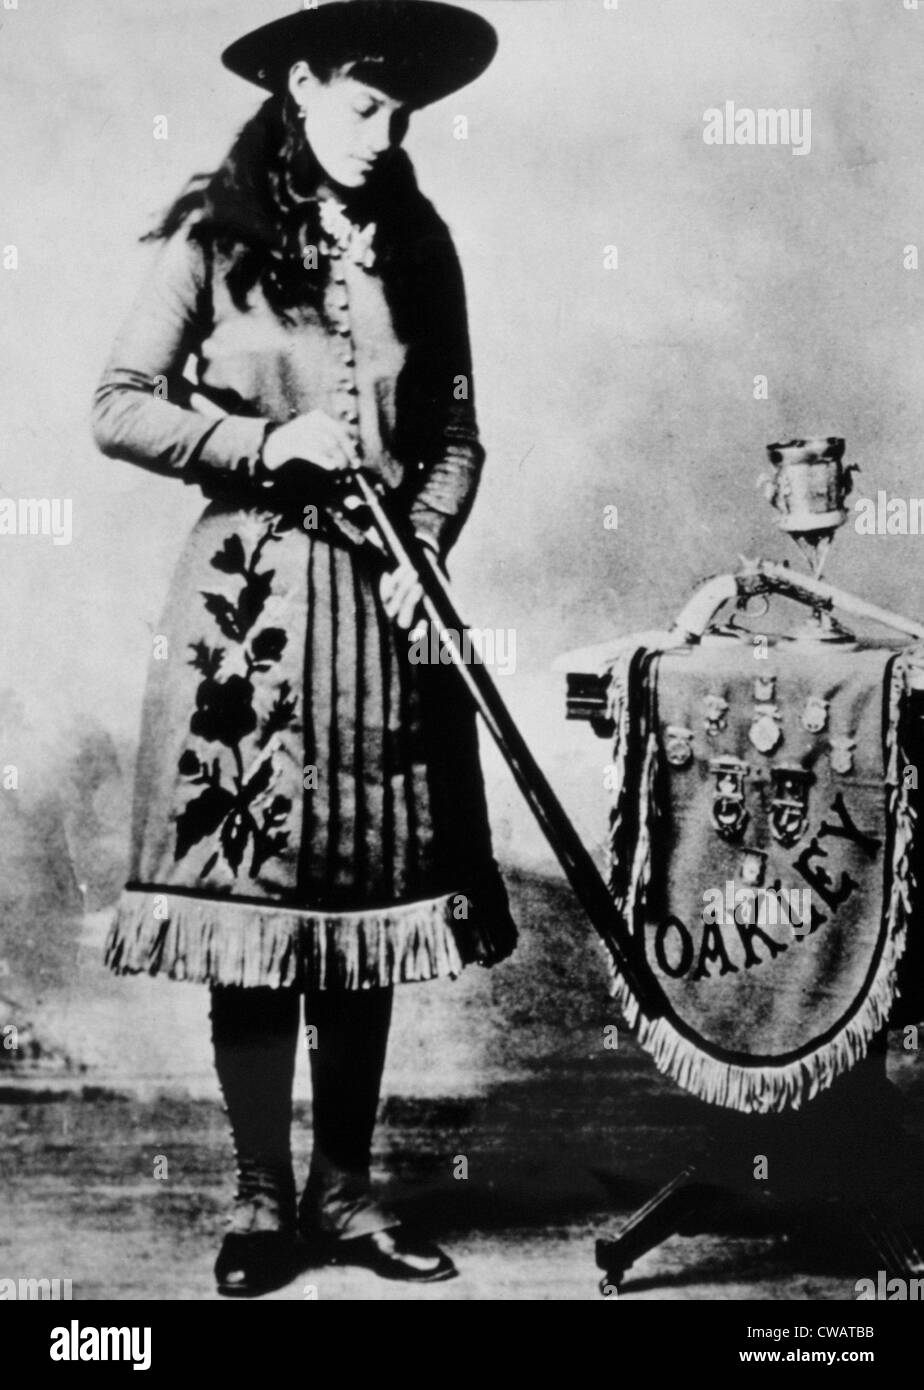 Annie Oakley High Resolution Stock Photography and Images - Alamy